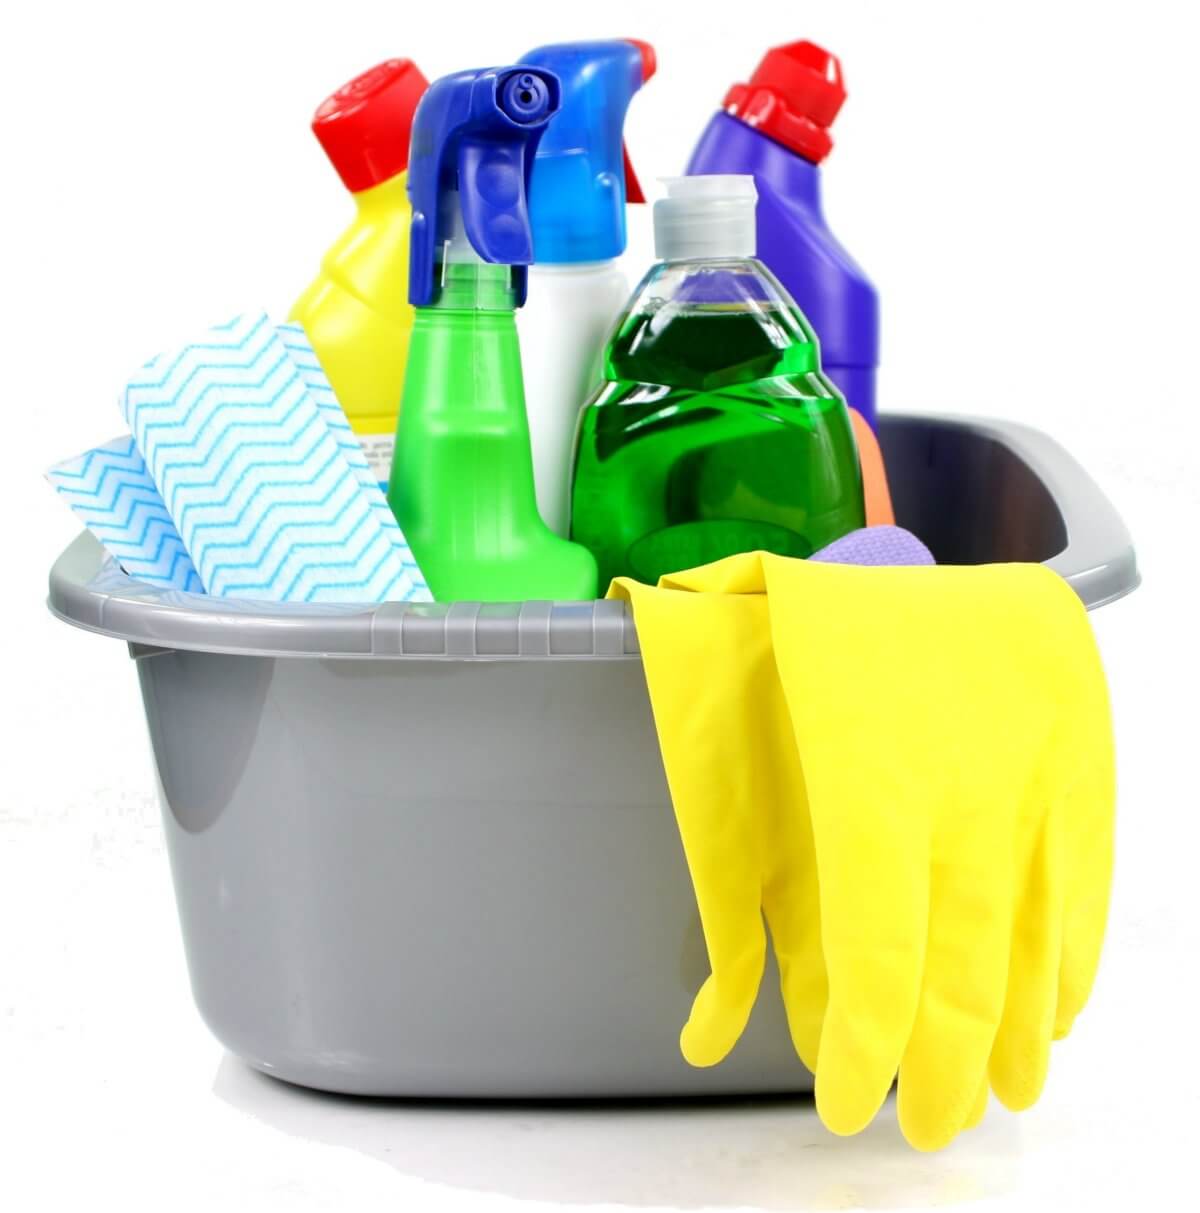 Cleaners, cleaning gloves and detergents in a basket 